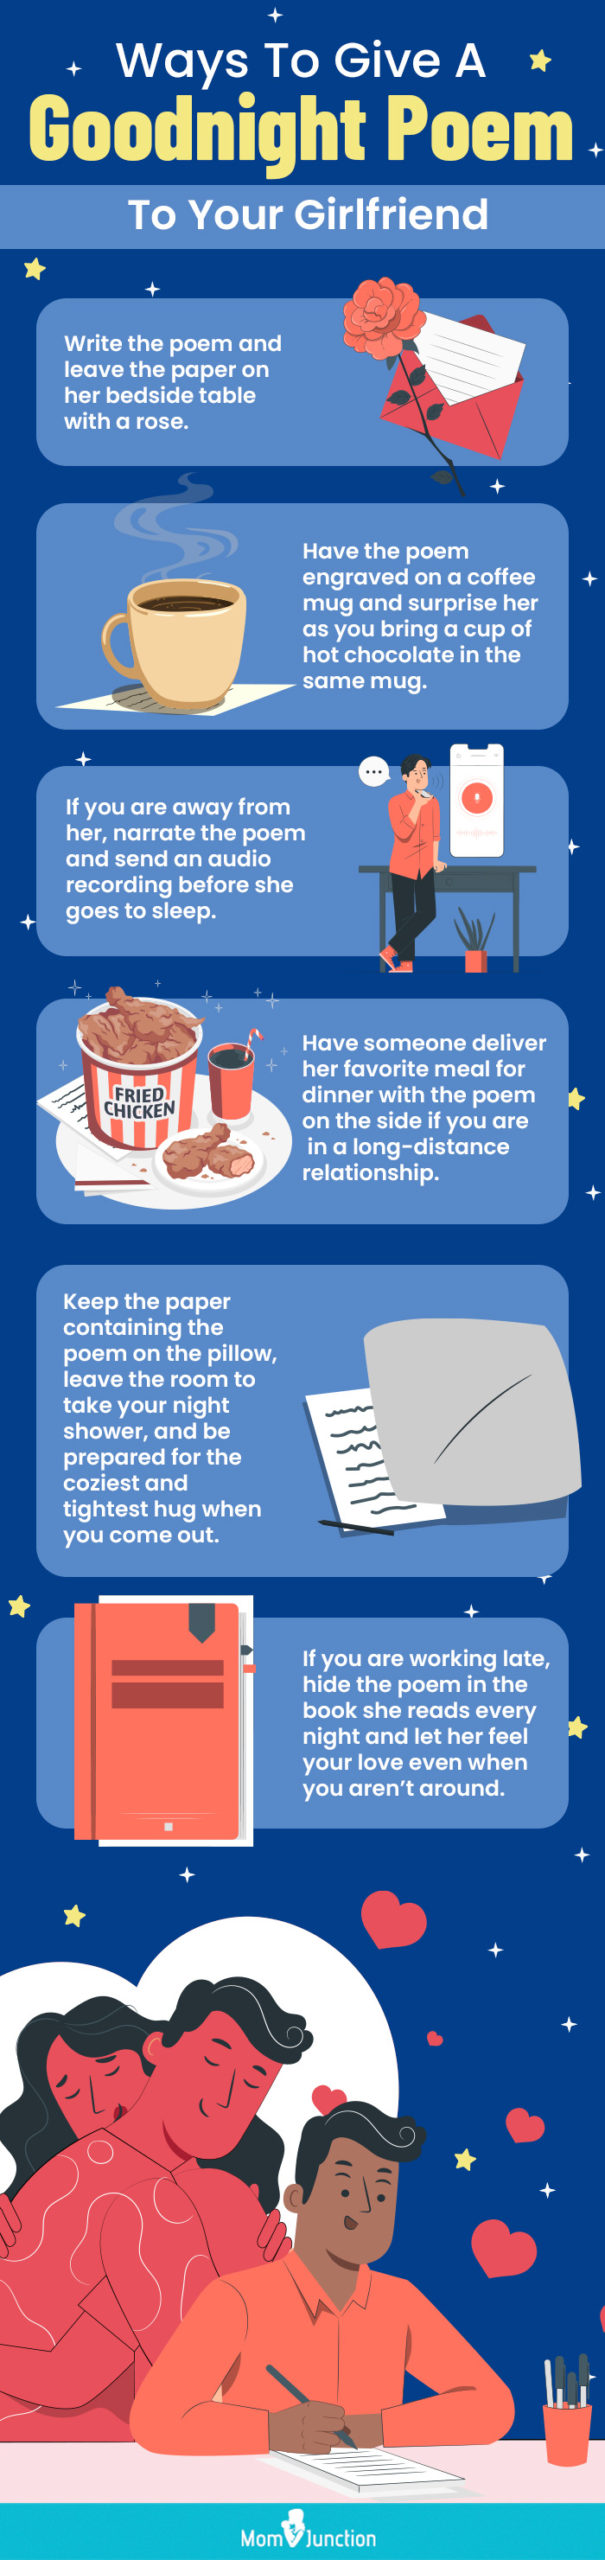 good night poem to girl friend (infographic)